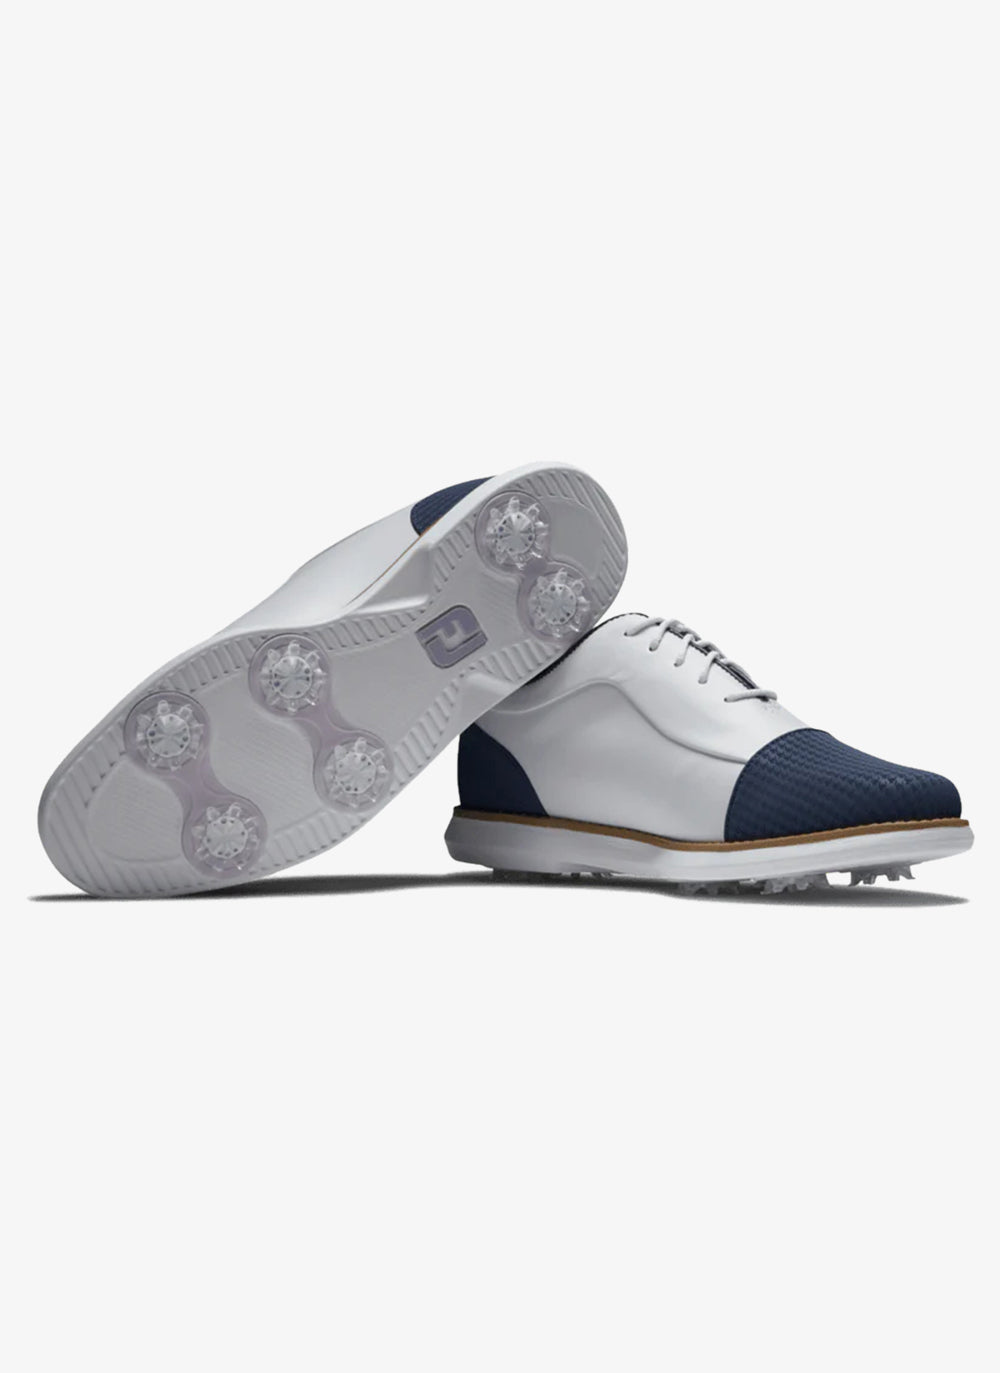 FootJoy Ladies Traditions Golf Shoes 97915